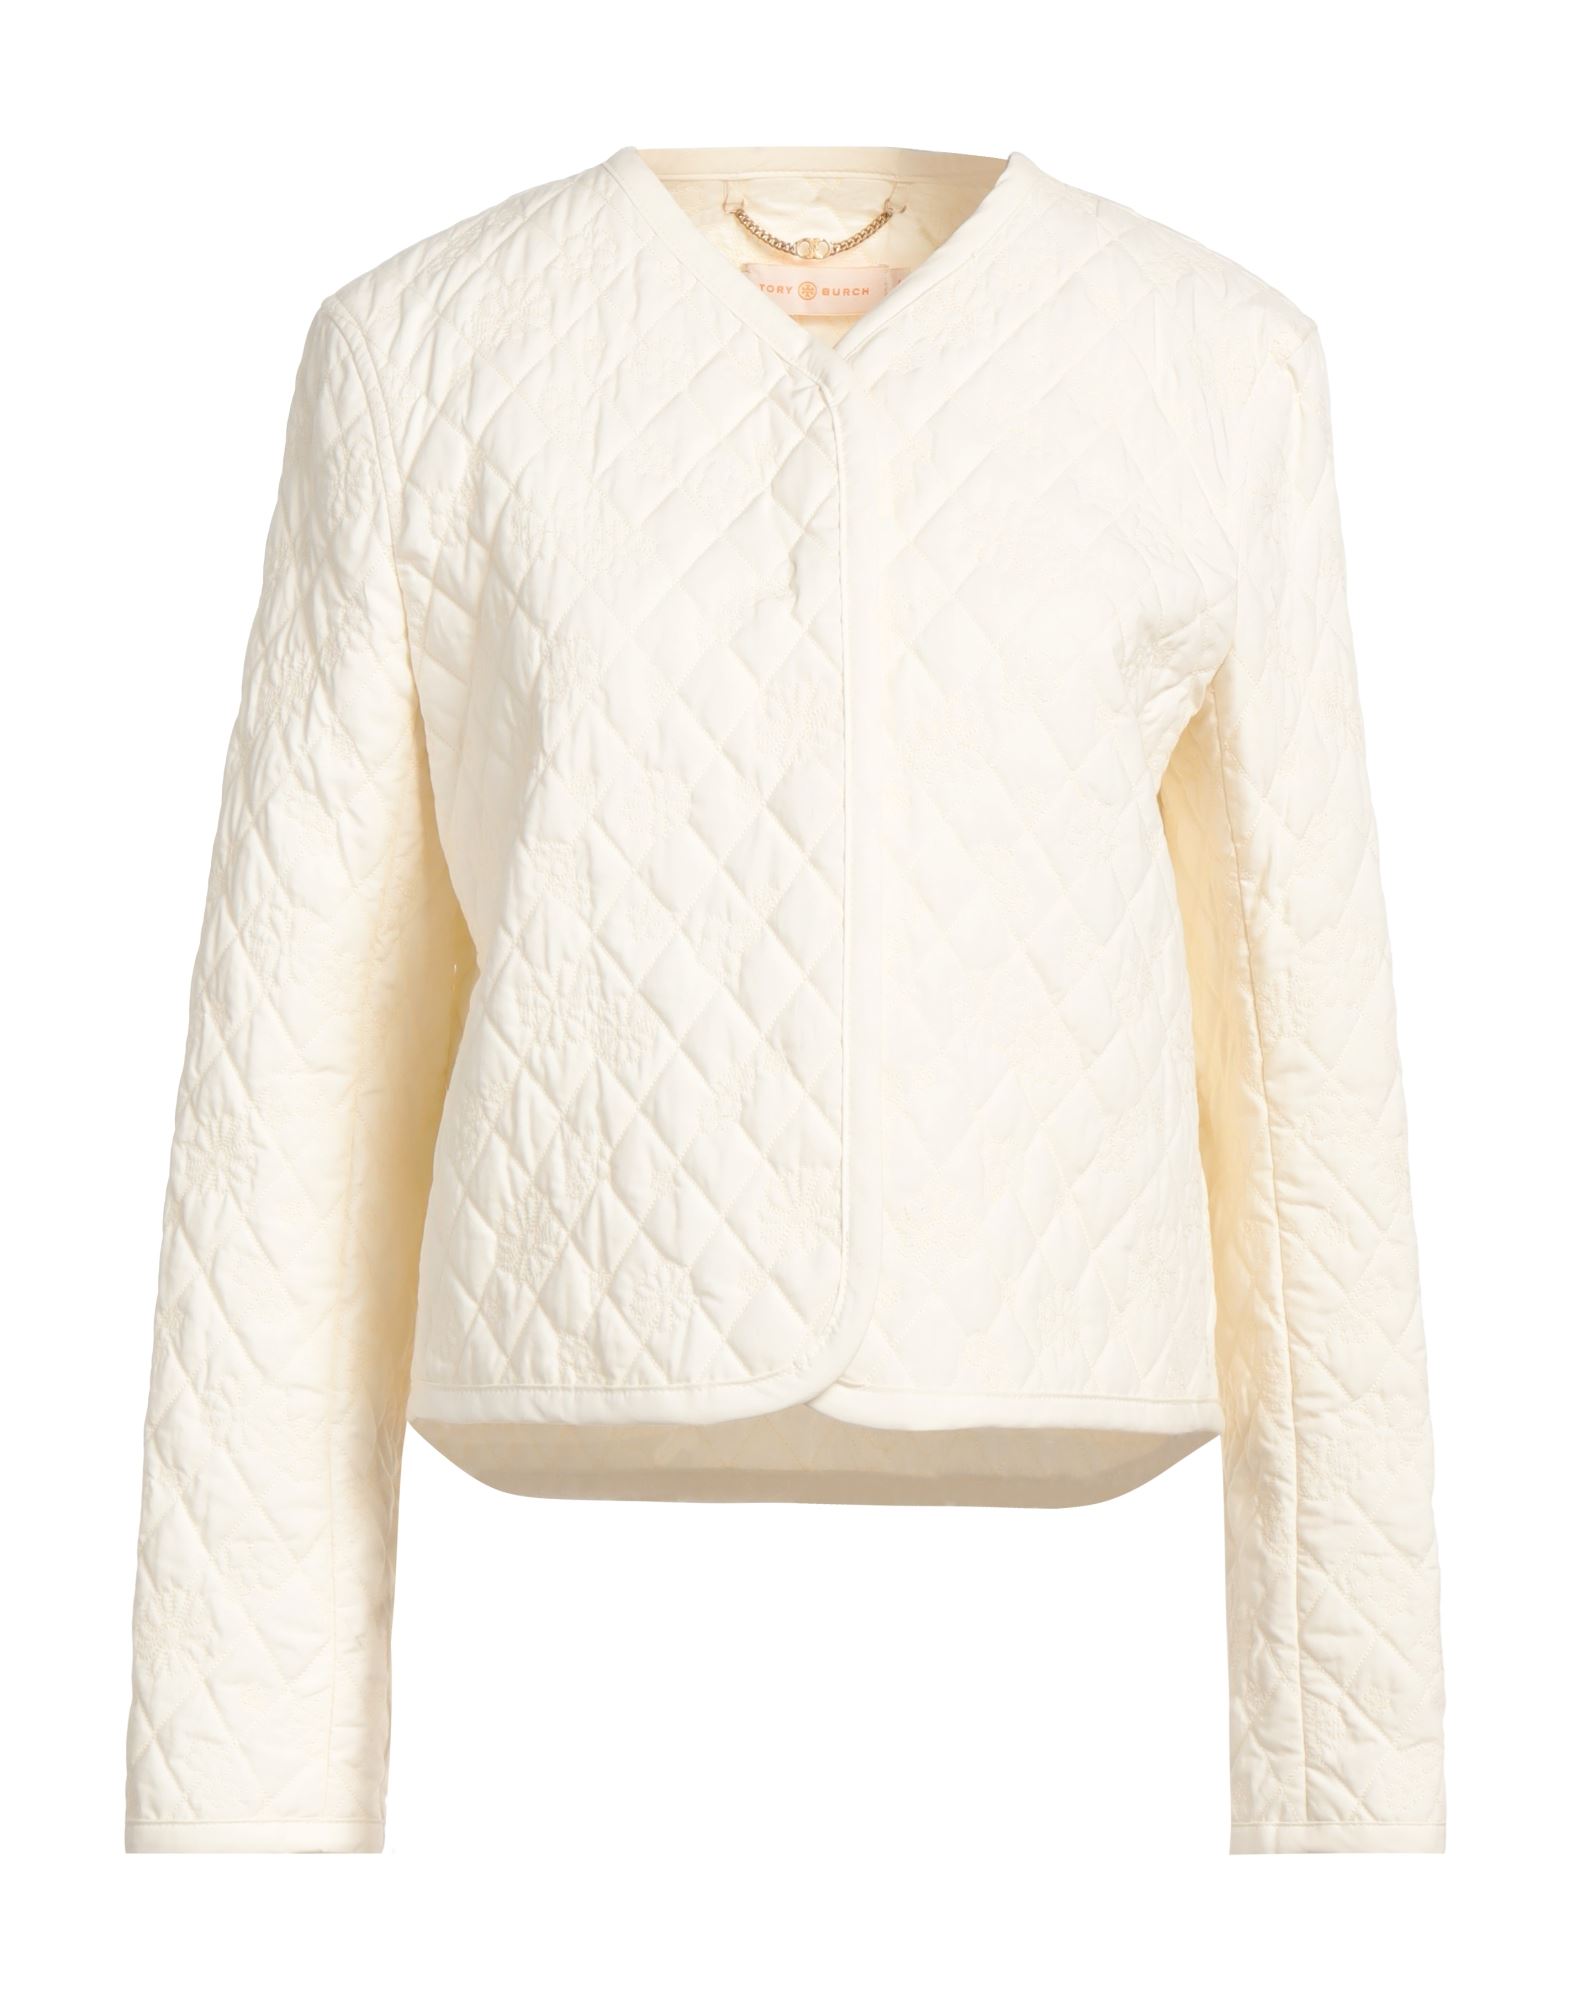 Tory Burch Jackets In White | ModeSens